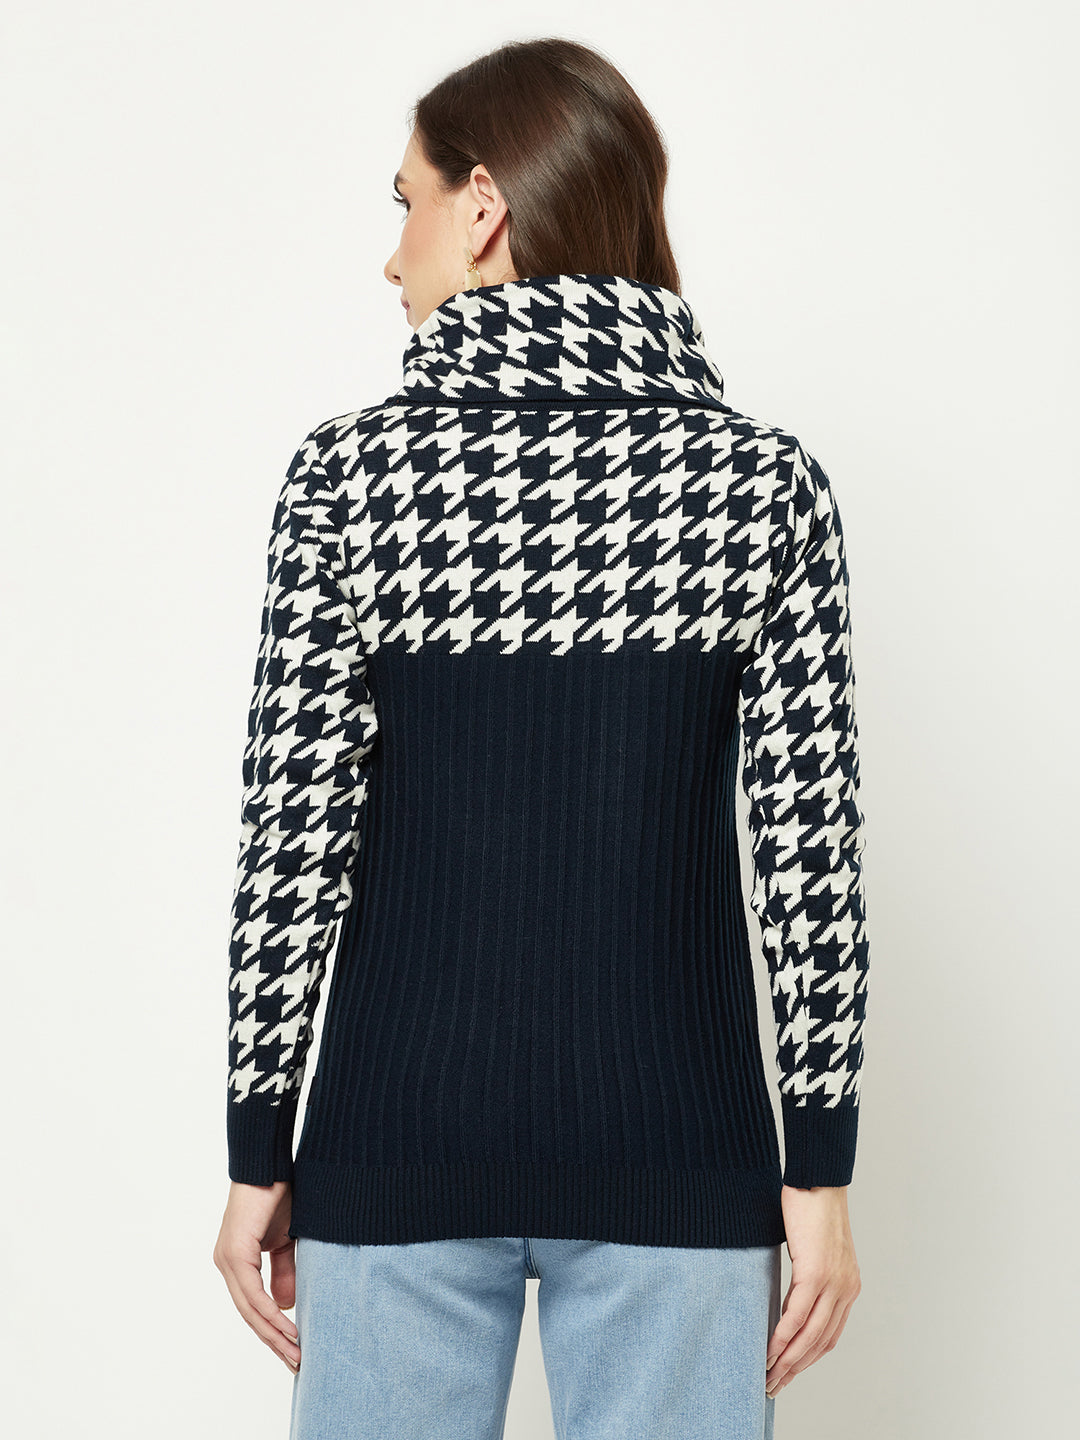  Navy Blue Abstract Turtleneck Sweater